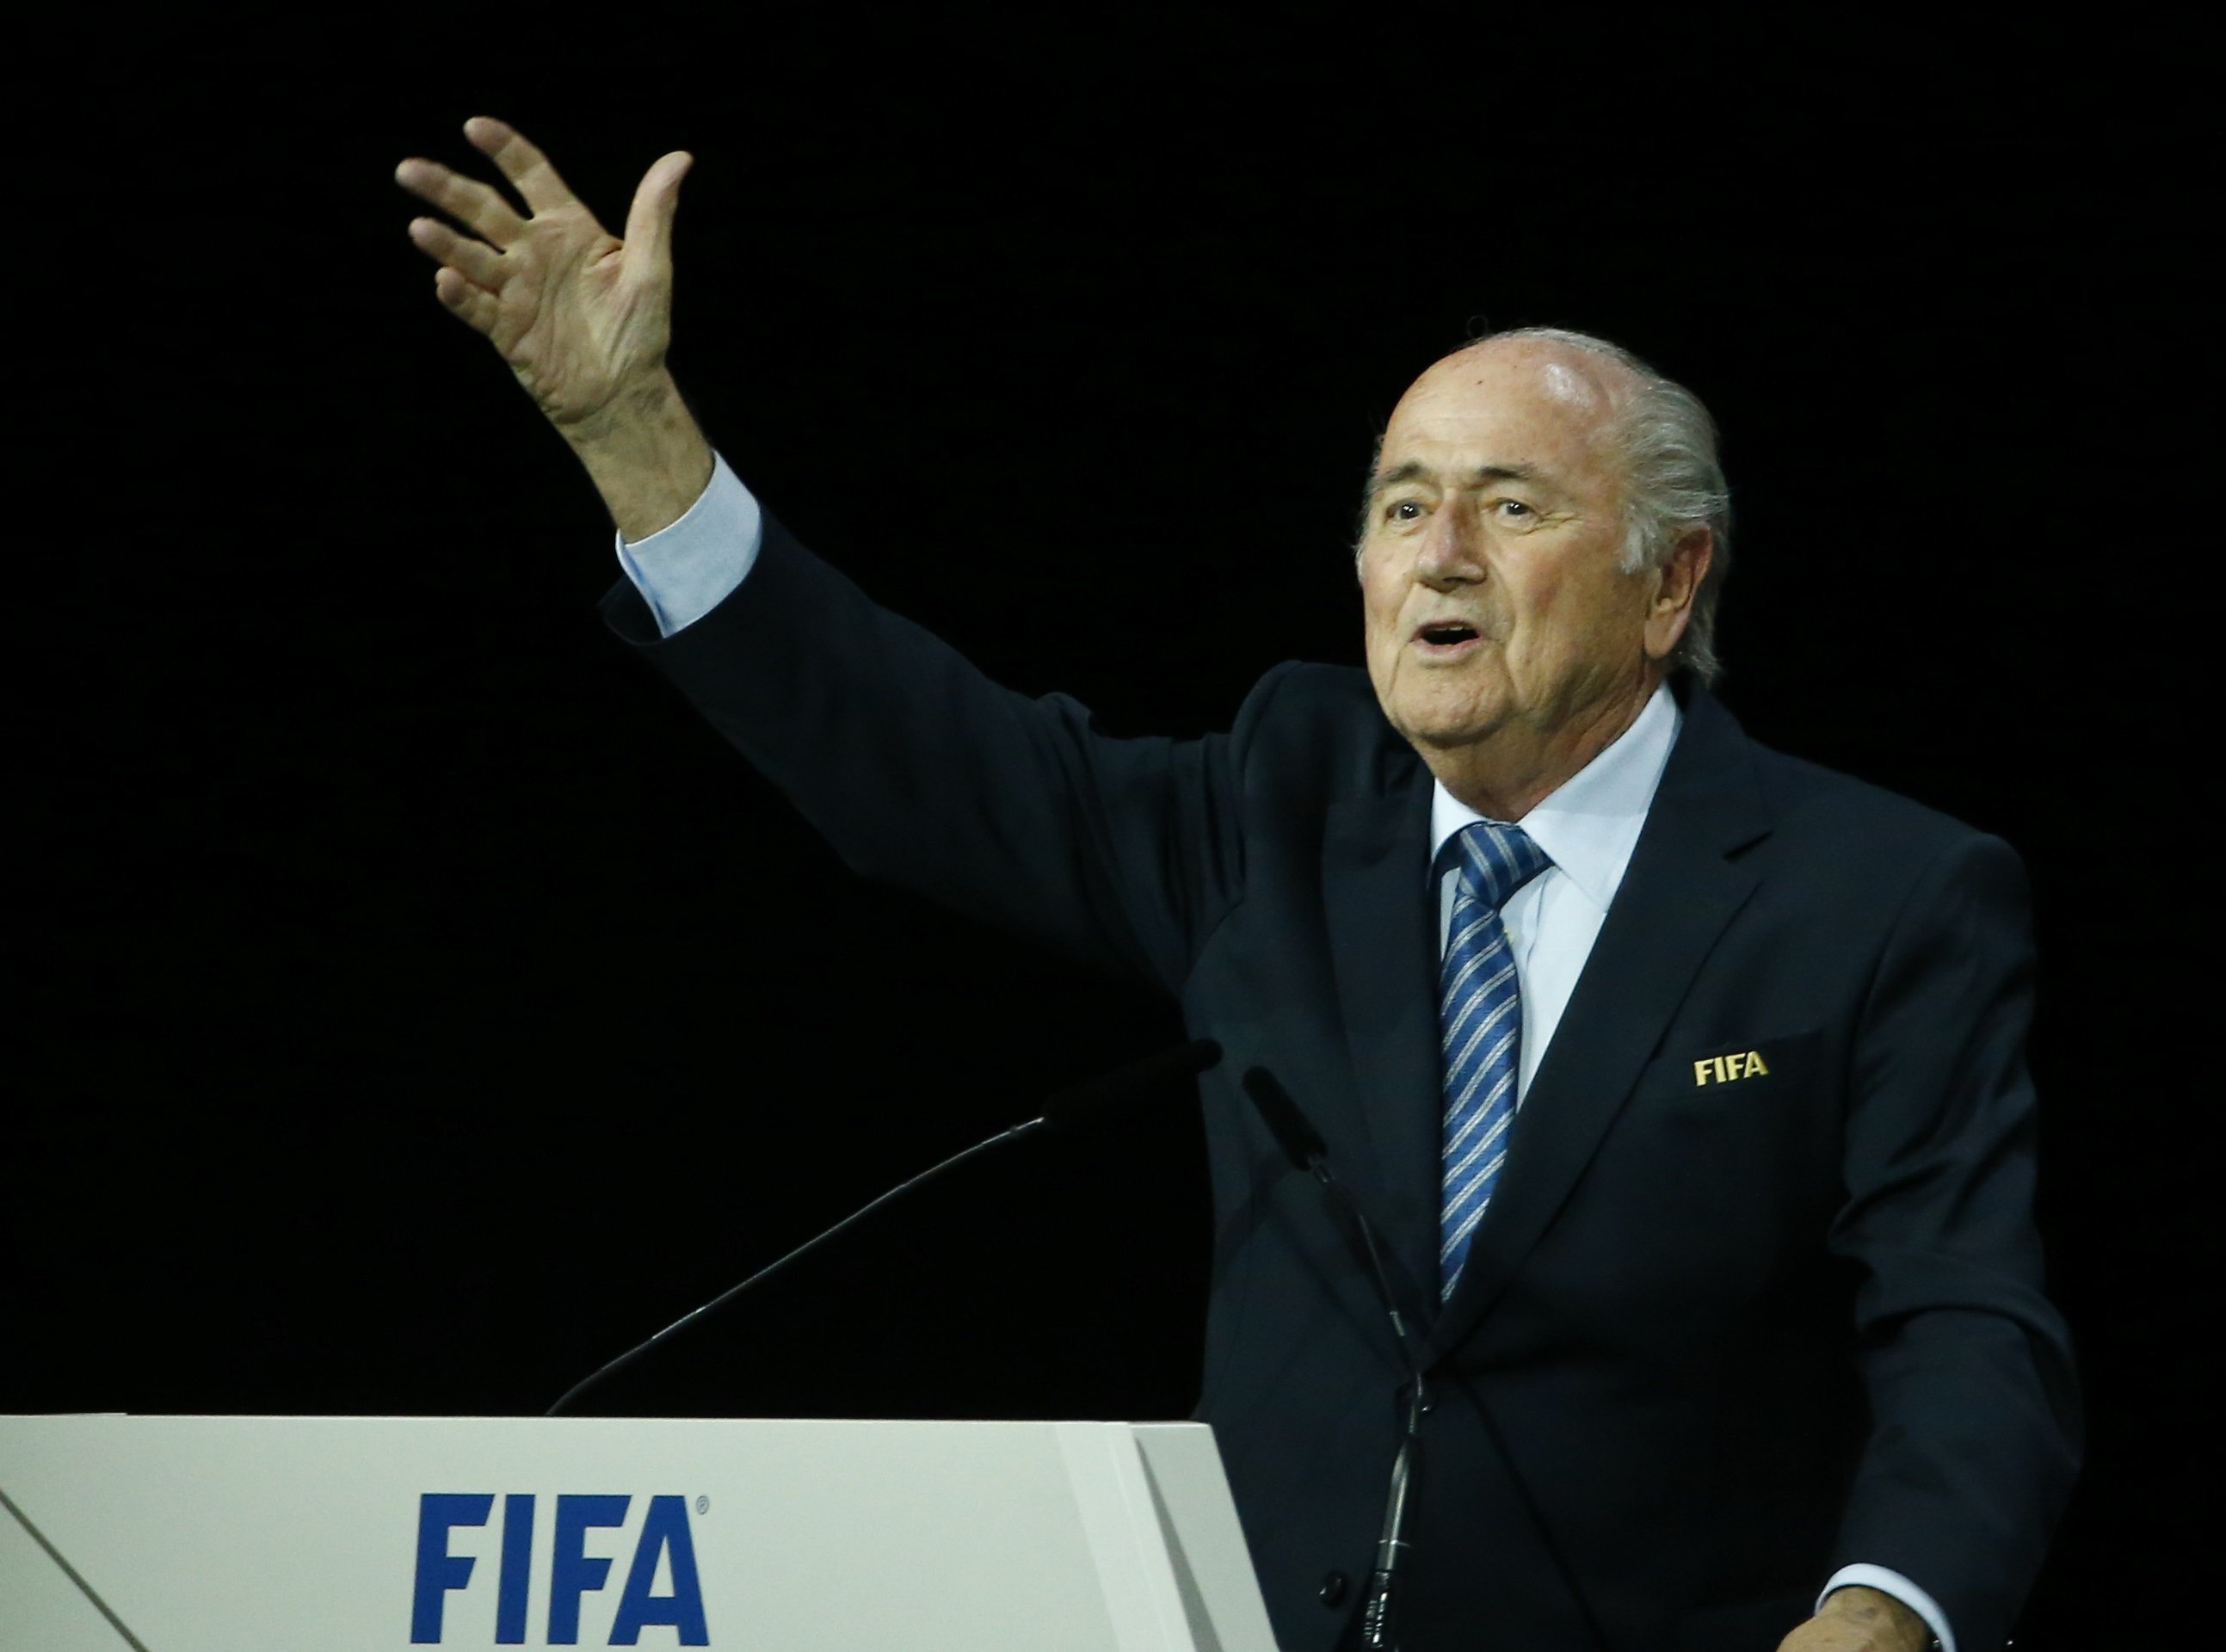 FIFA President Sepp Blatter speaks after he was re-elected at the 65th FIFA Congress in Zurich on May 29, 2015. (Ruben Sprich—Reuters)